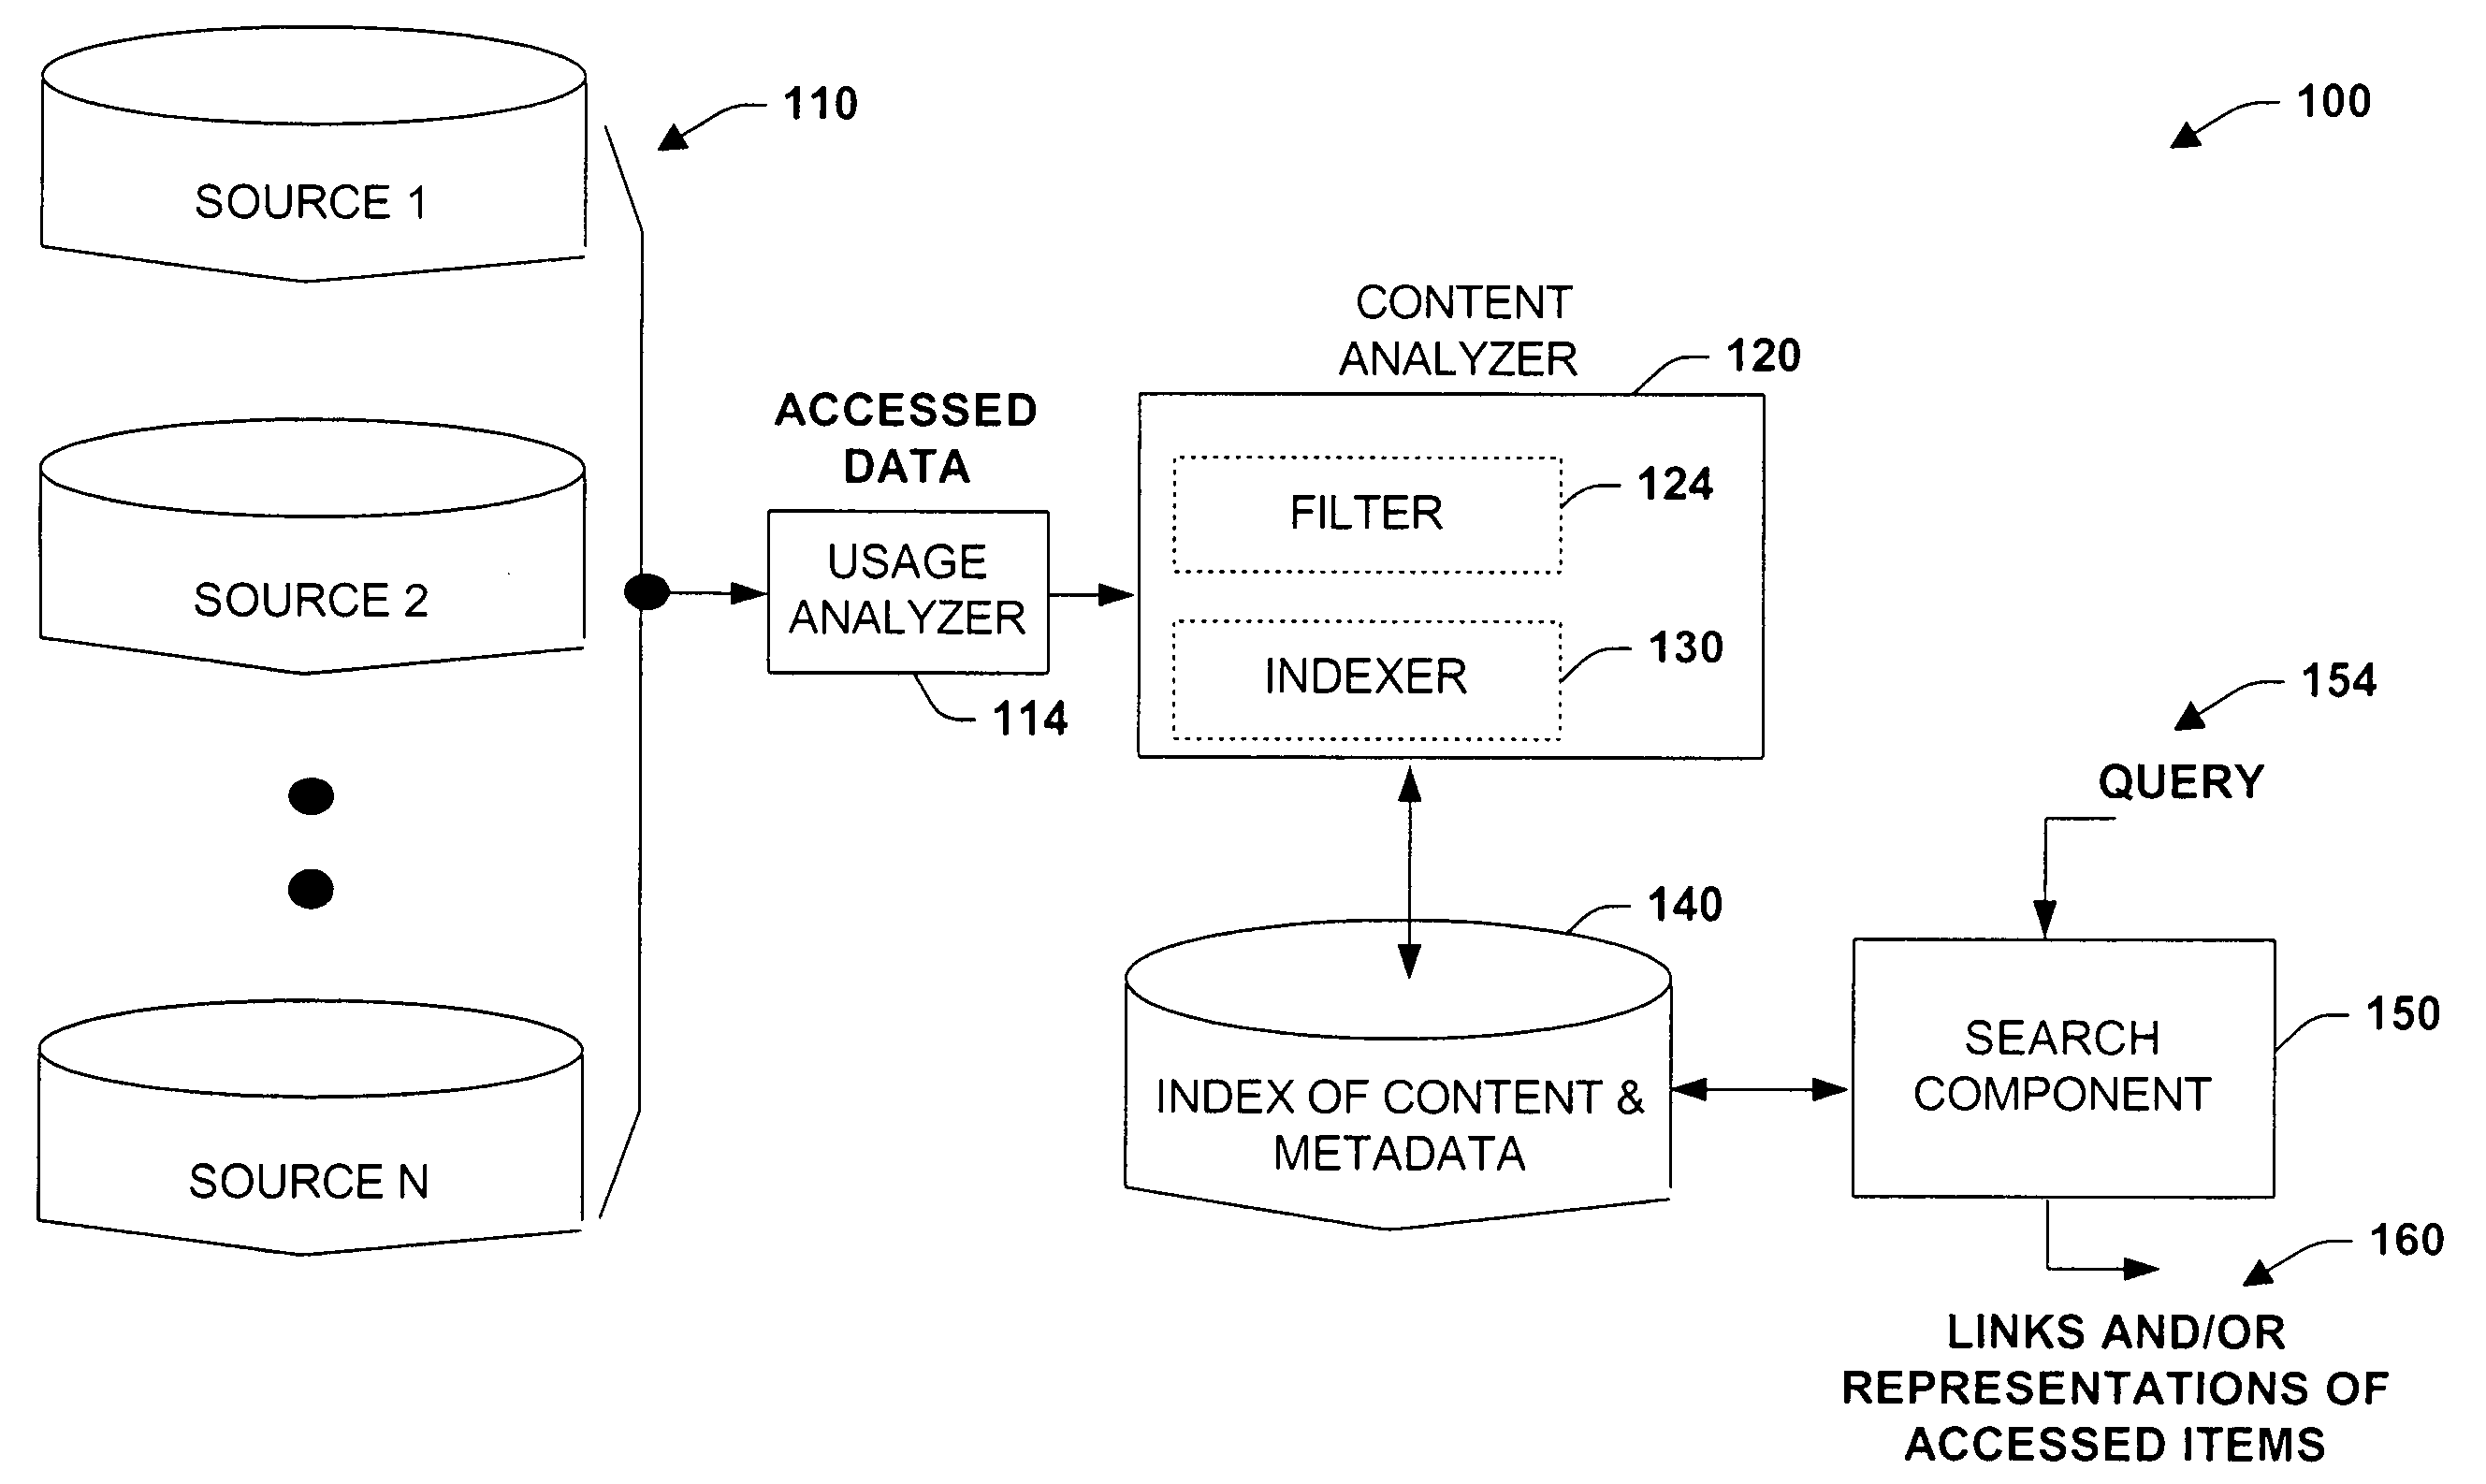 Method and system for usage analyzer that determines user accessed sources, indexes data subsets, and associated metadata, processing implicit queries based on potential interest to users